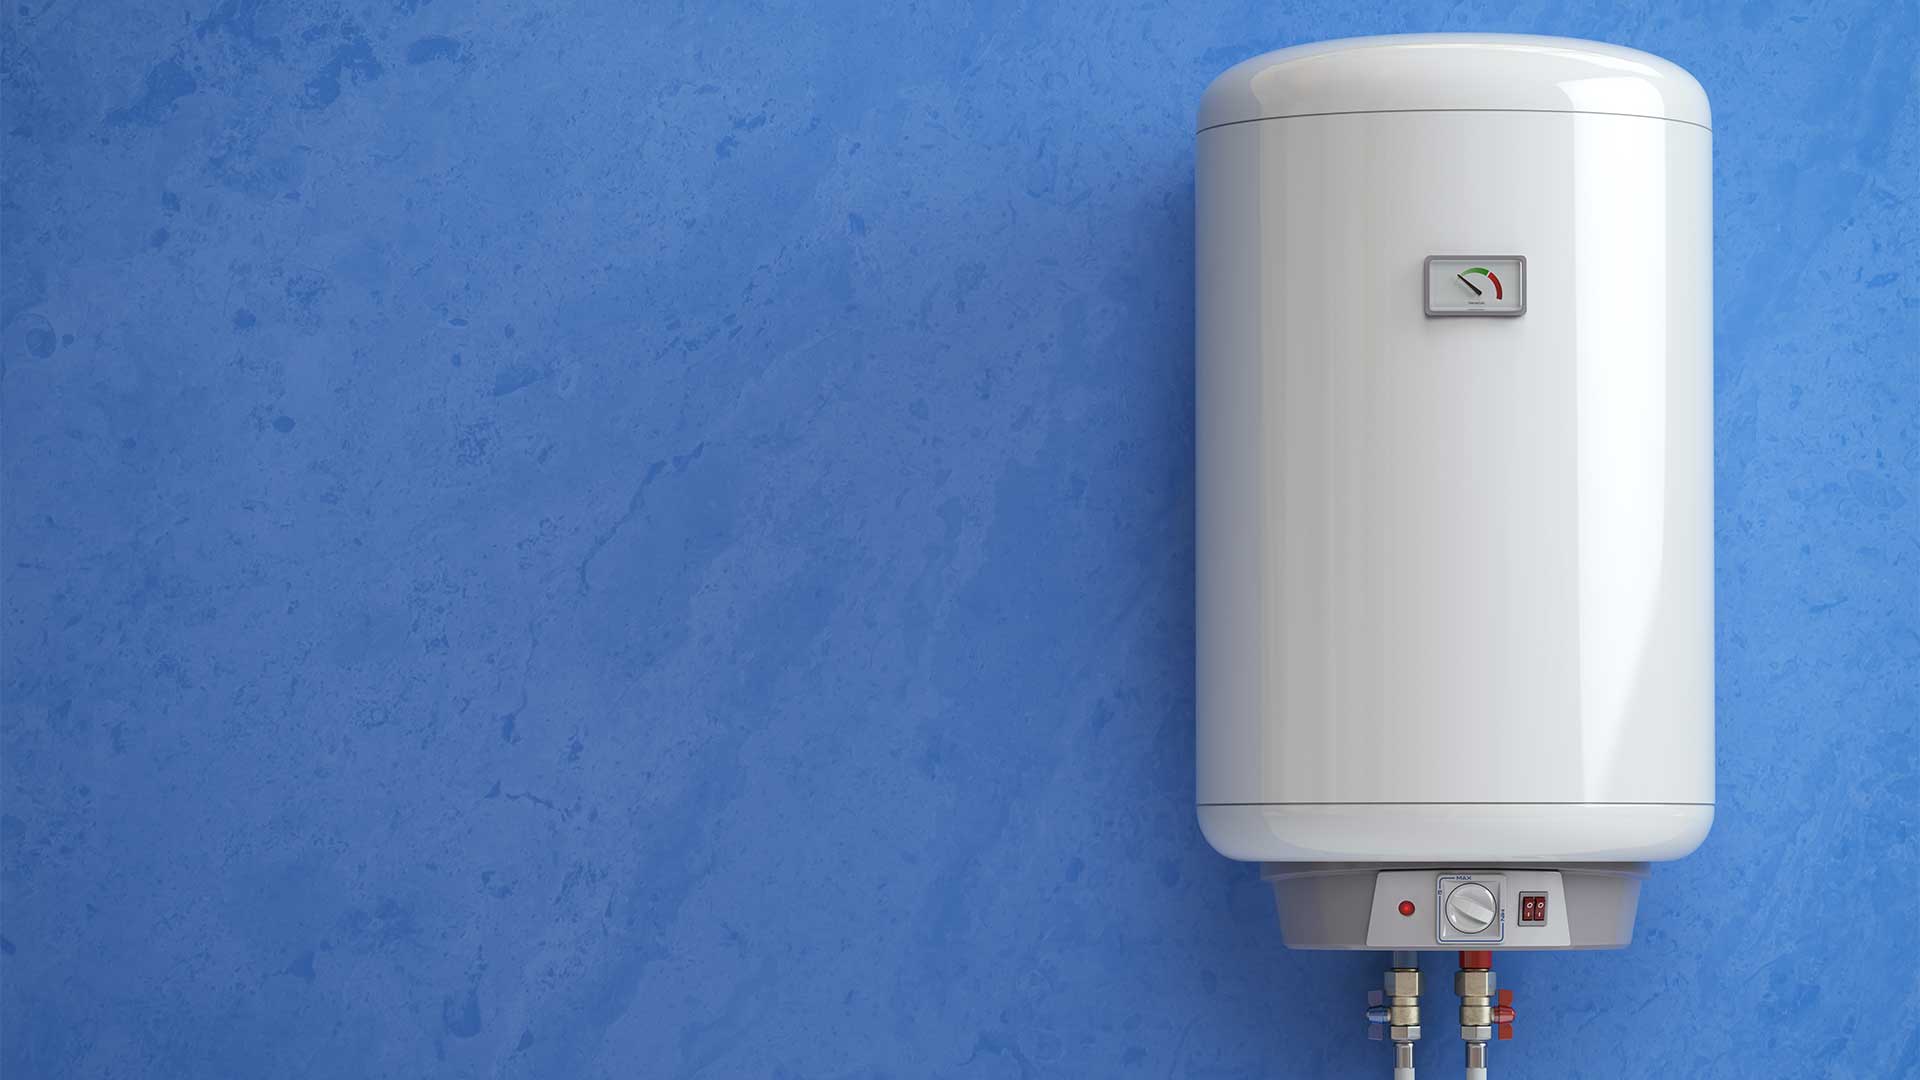 How To Turn On Electric Water Heater- Step By Step Guide